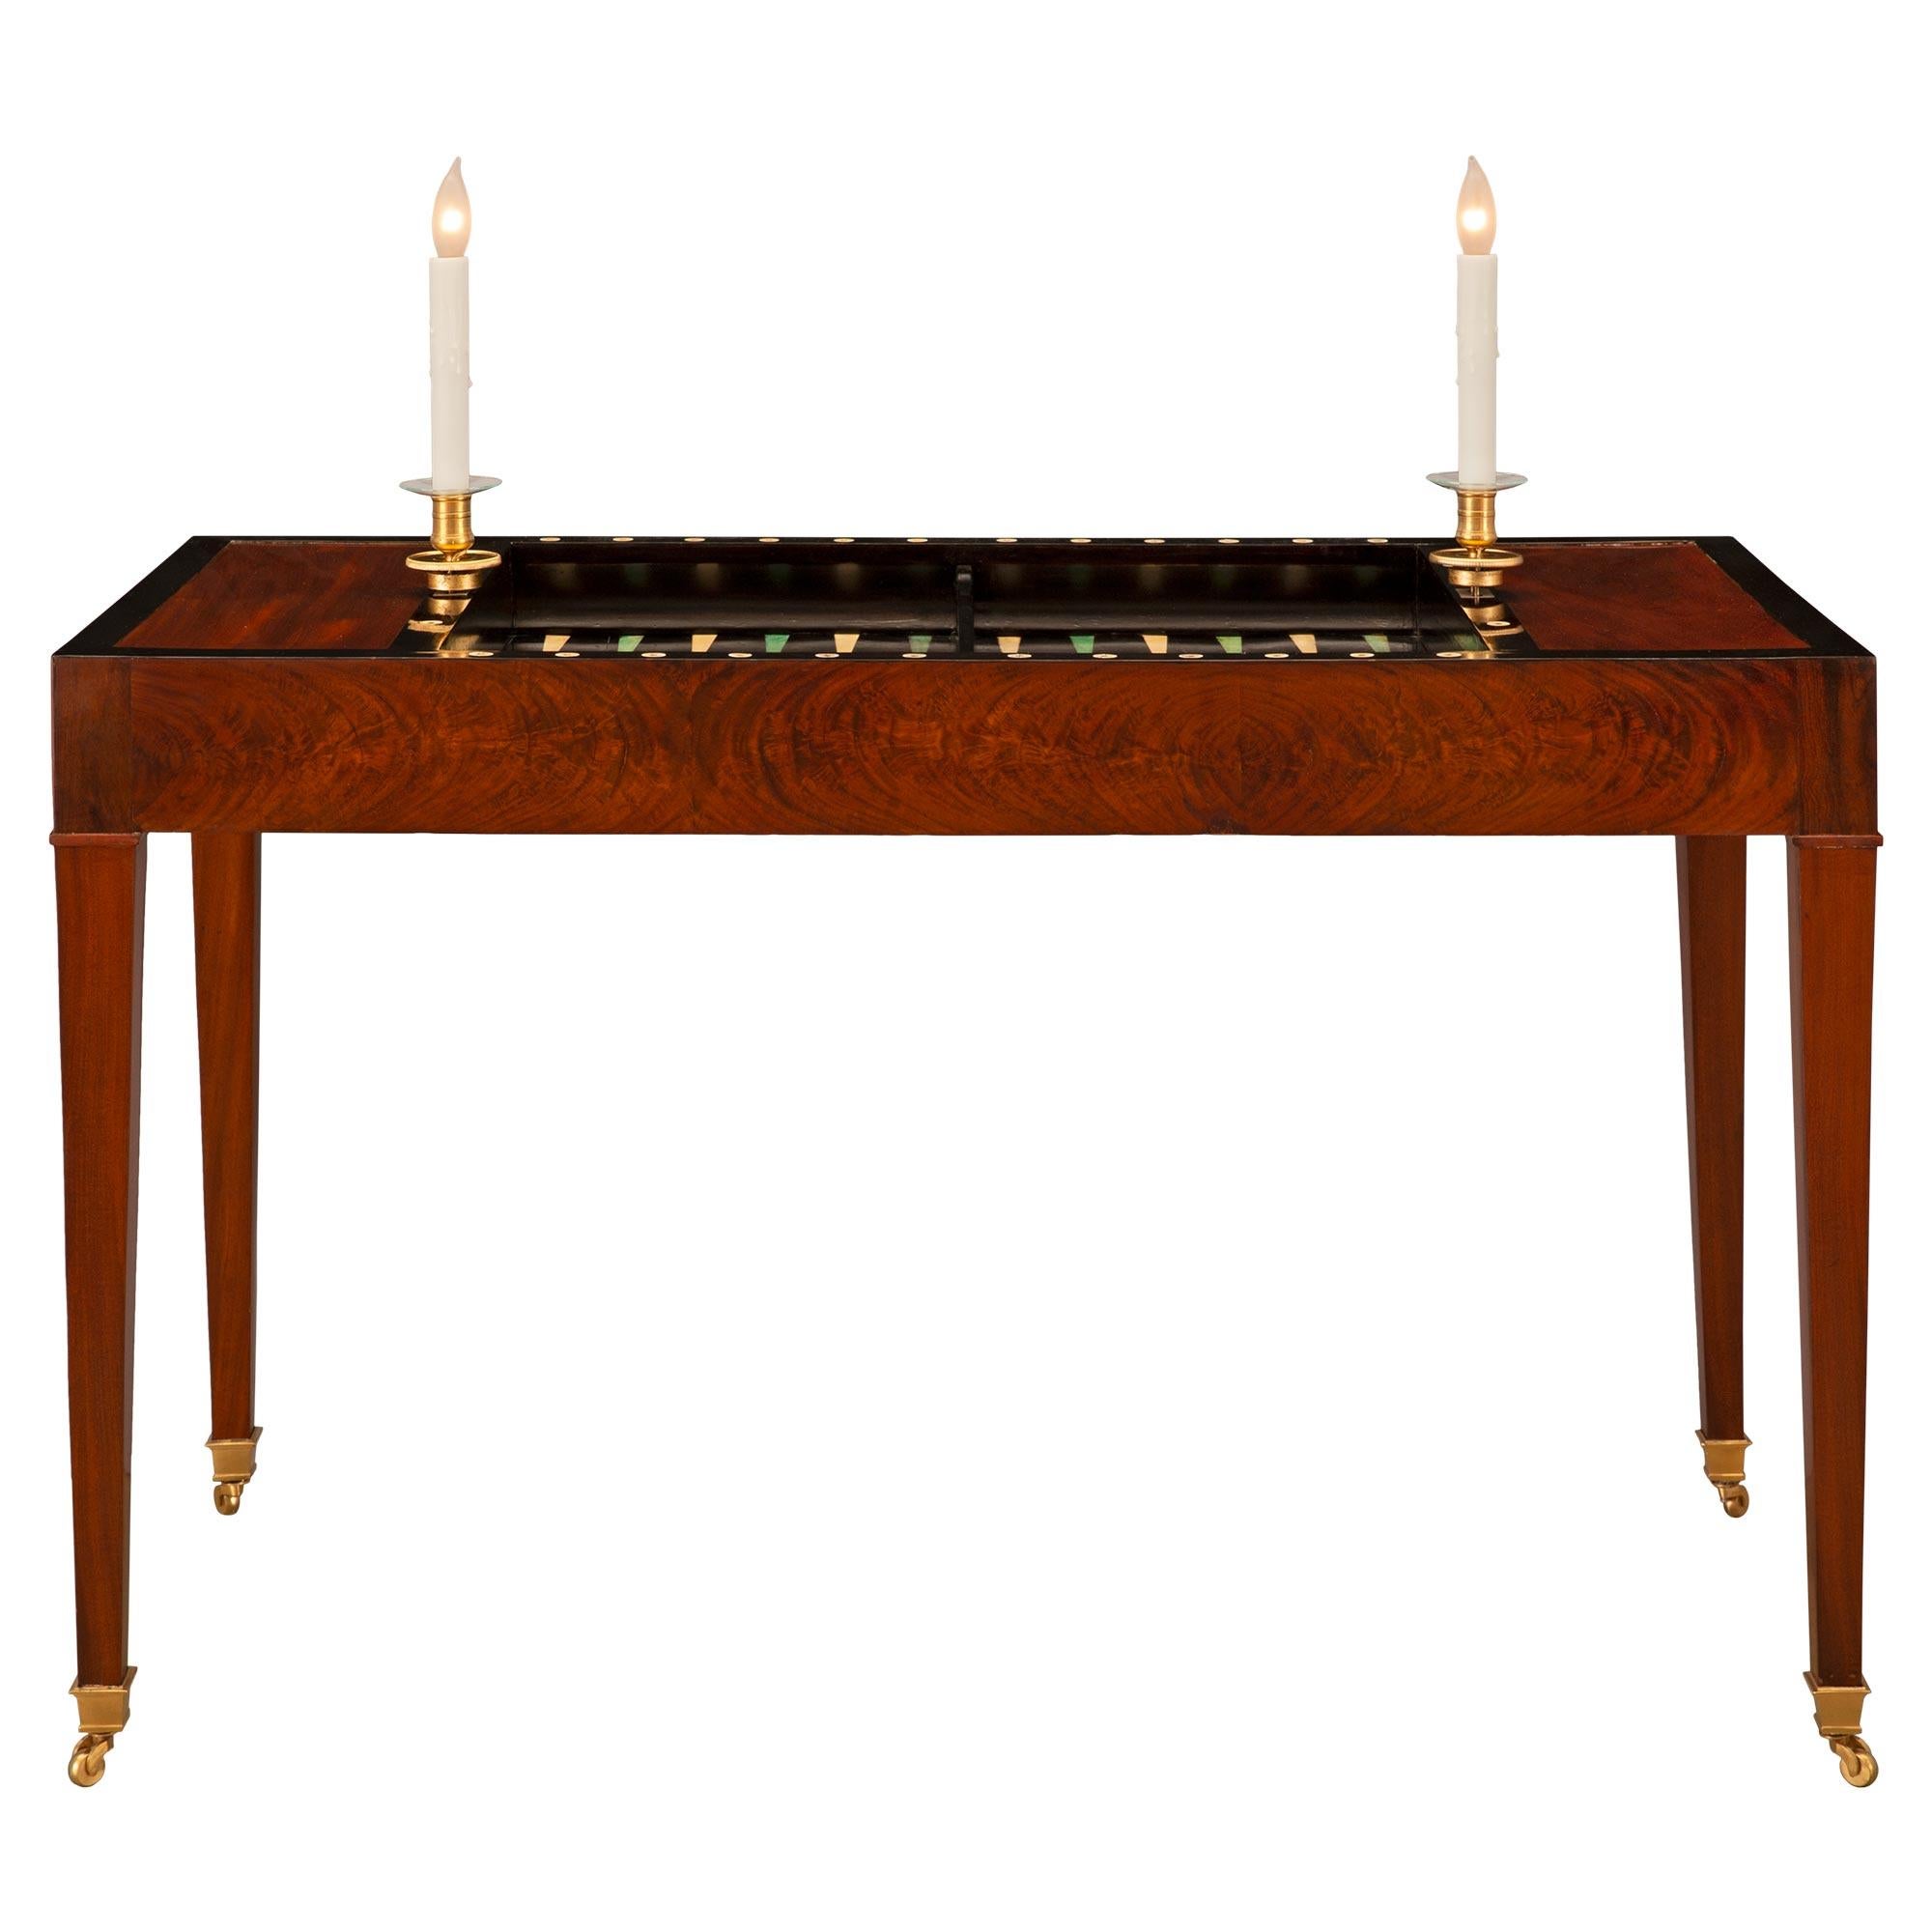 French Late 18th Century Louis XVI Period Mahogany and Ormolu Games Table For Sale 7